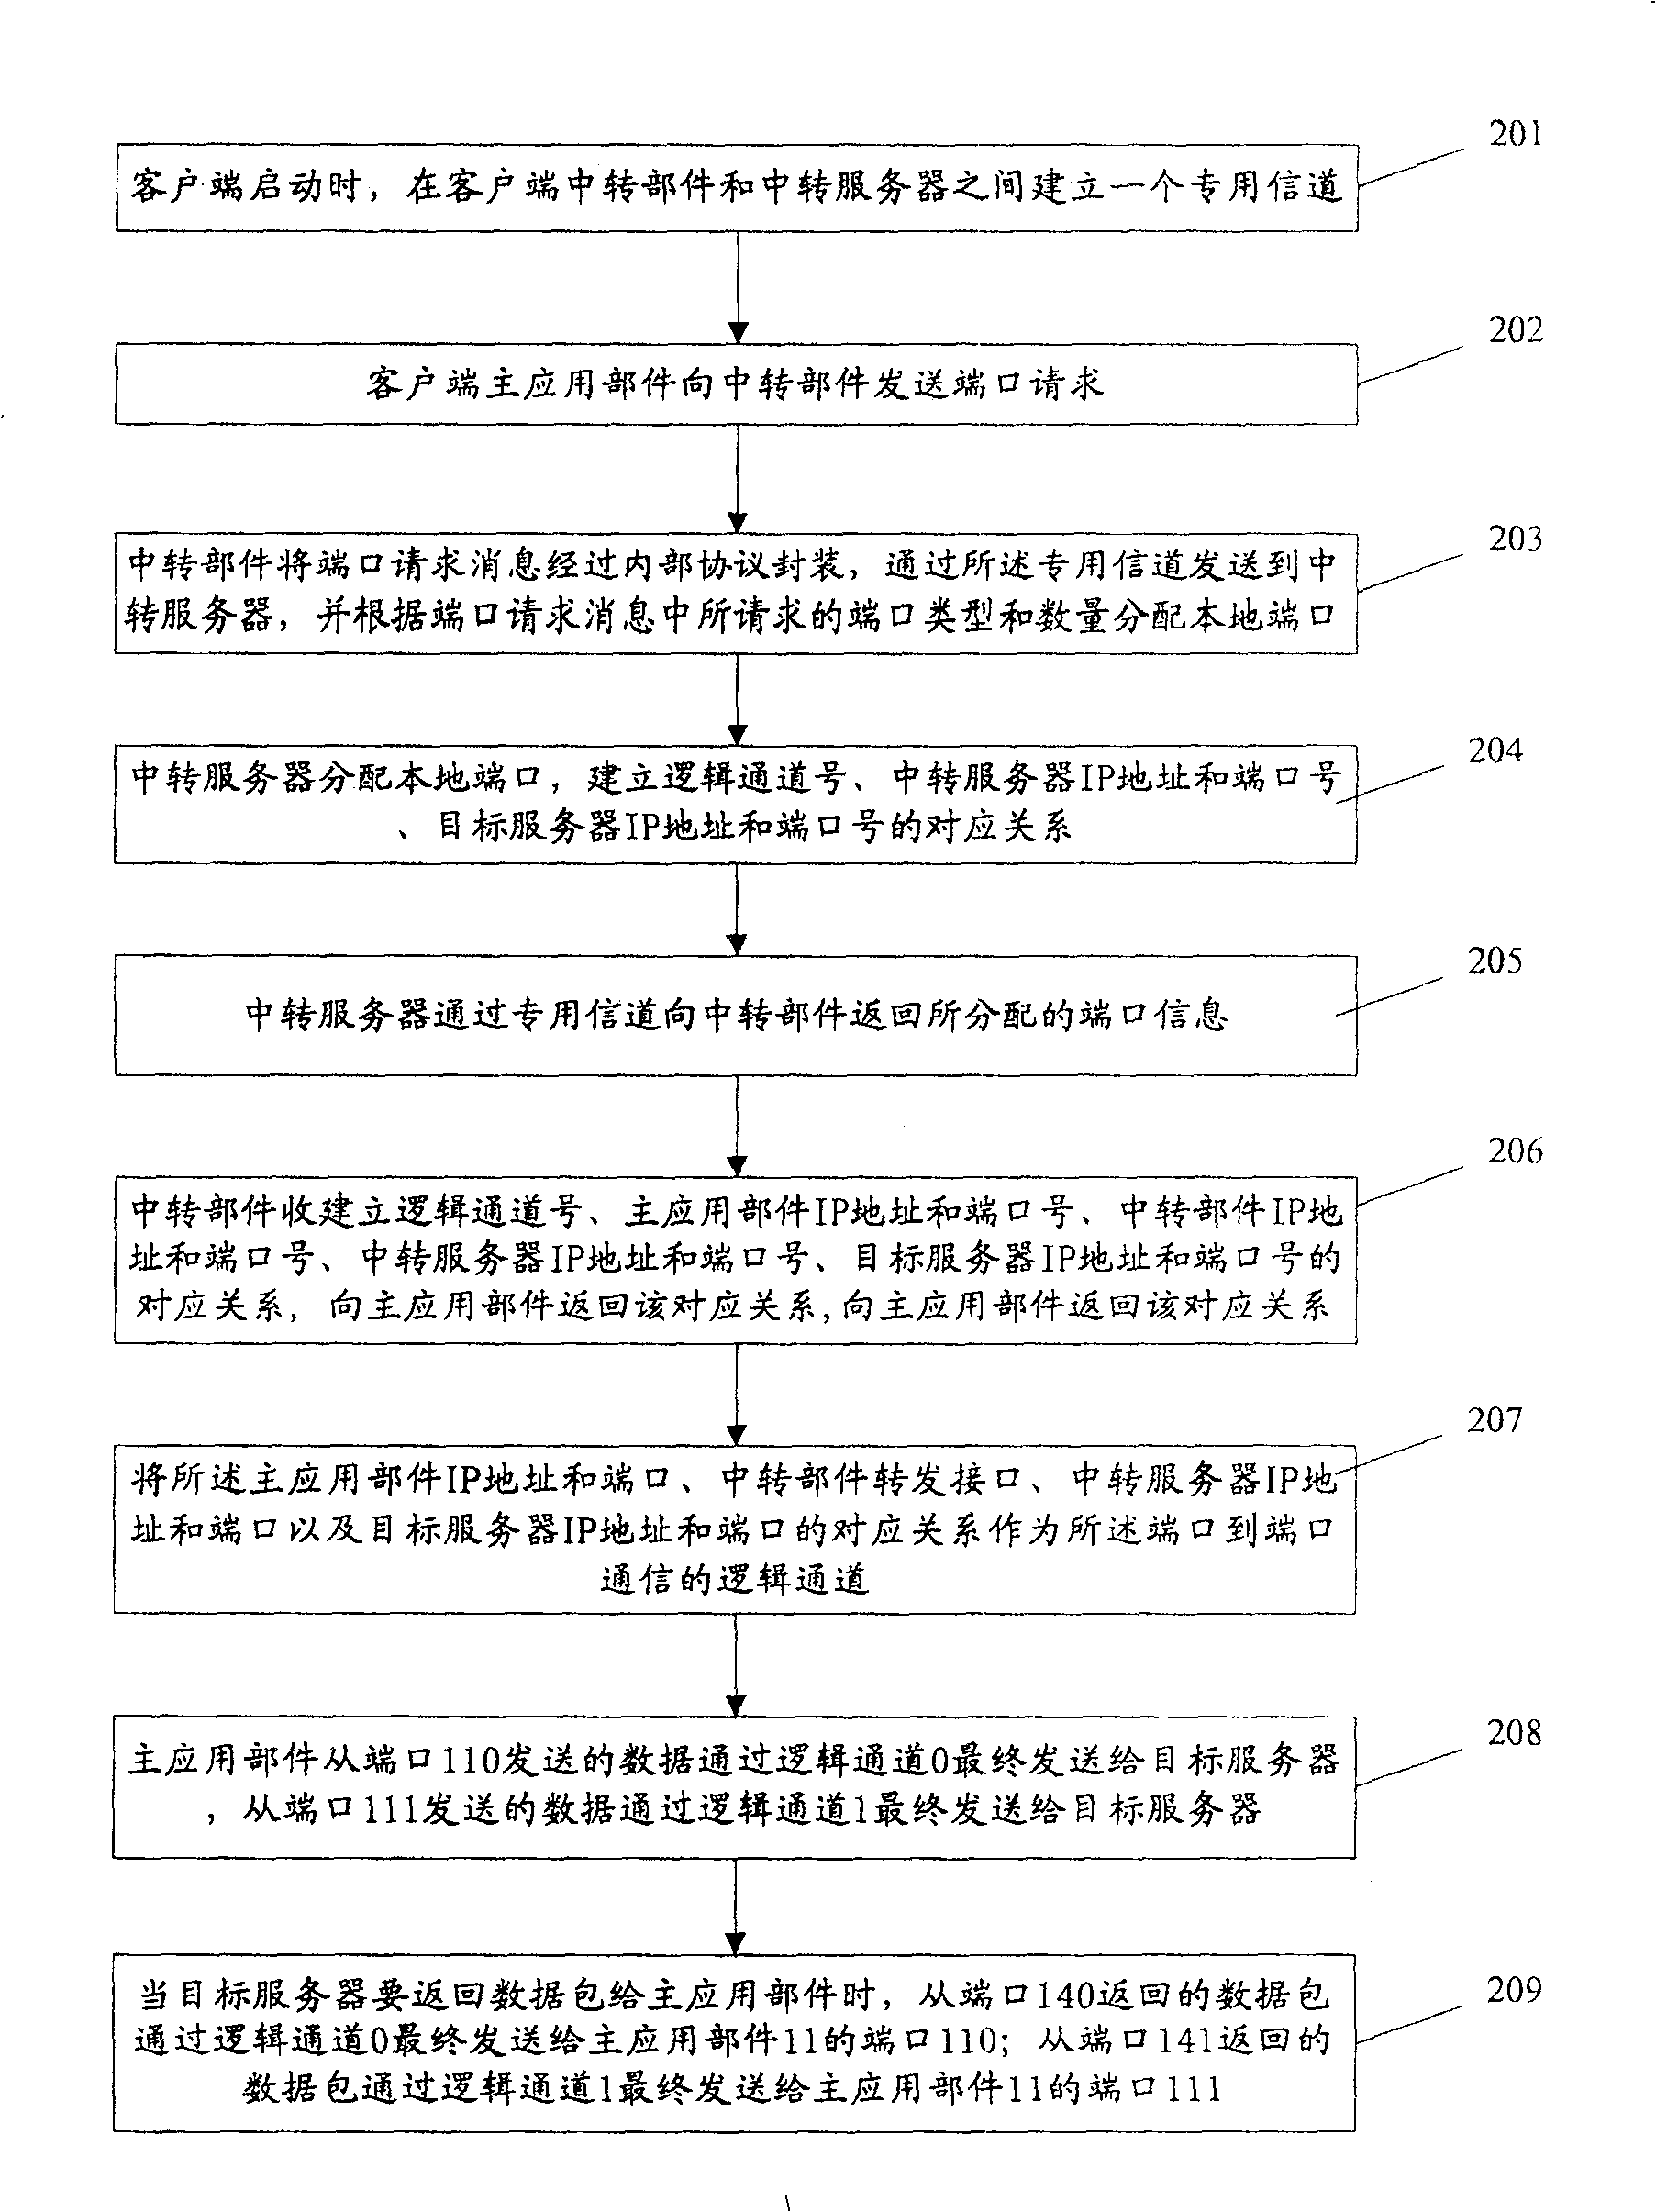 Device and method for telecommunicating between customer end application component and object server